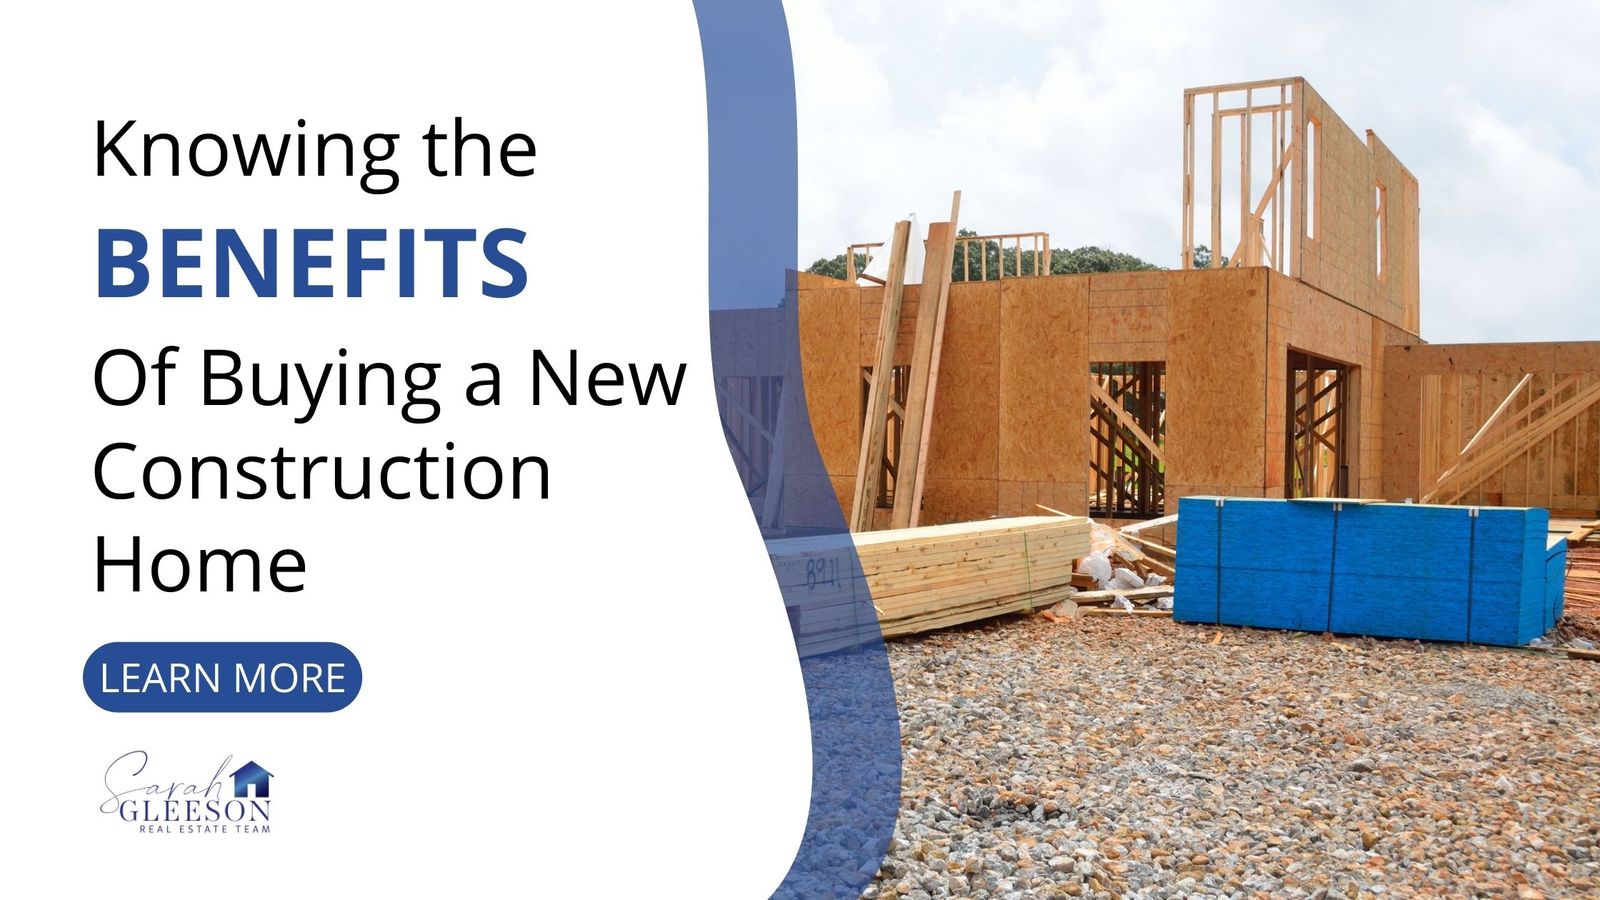 Benefits of Buying a New Construction Home